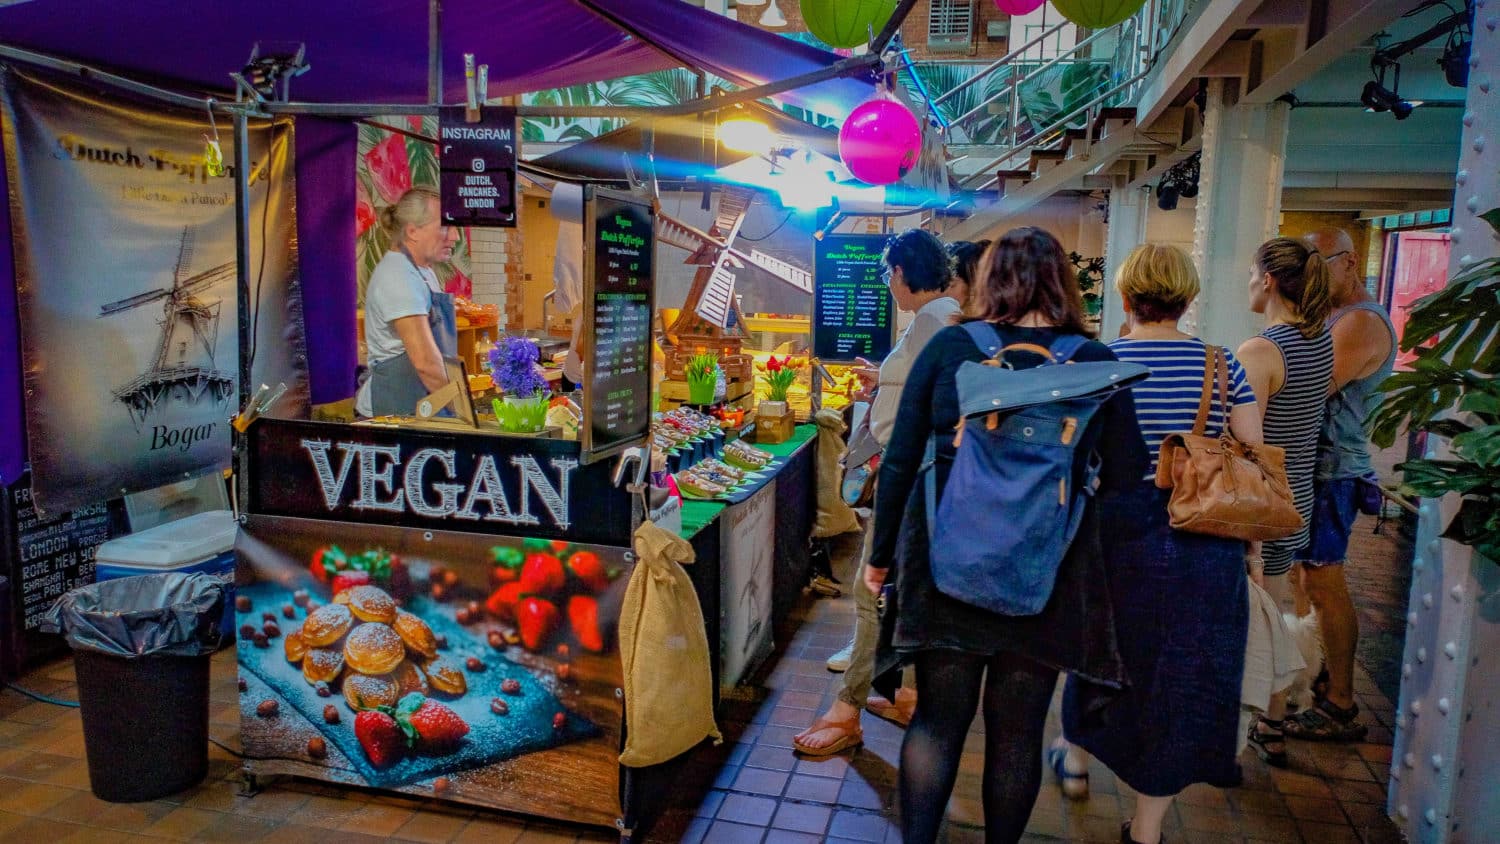 vegan food stall in a market, part of the systemic change we need